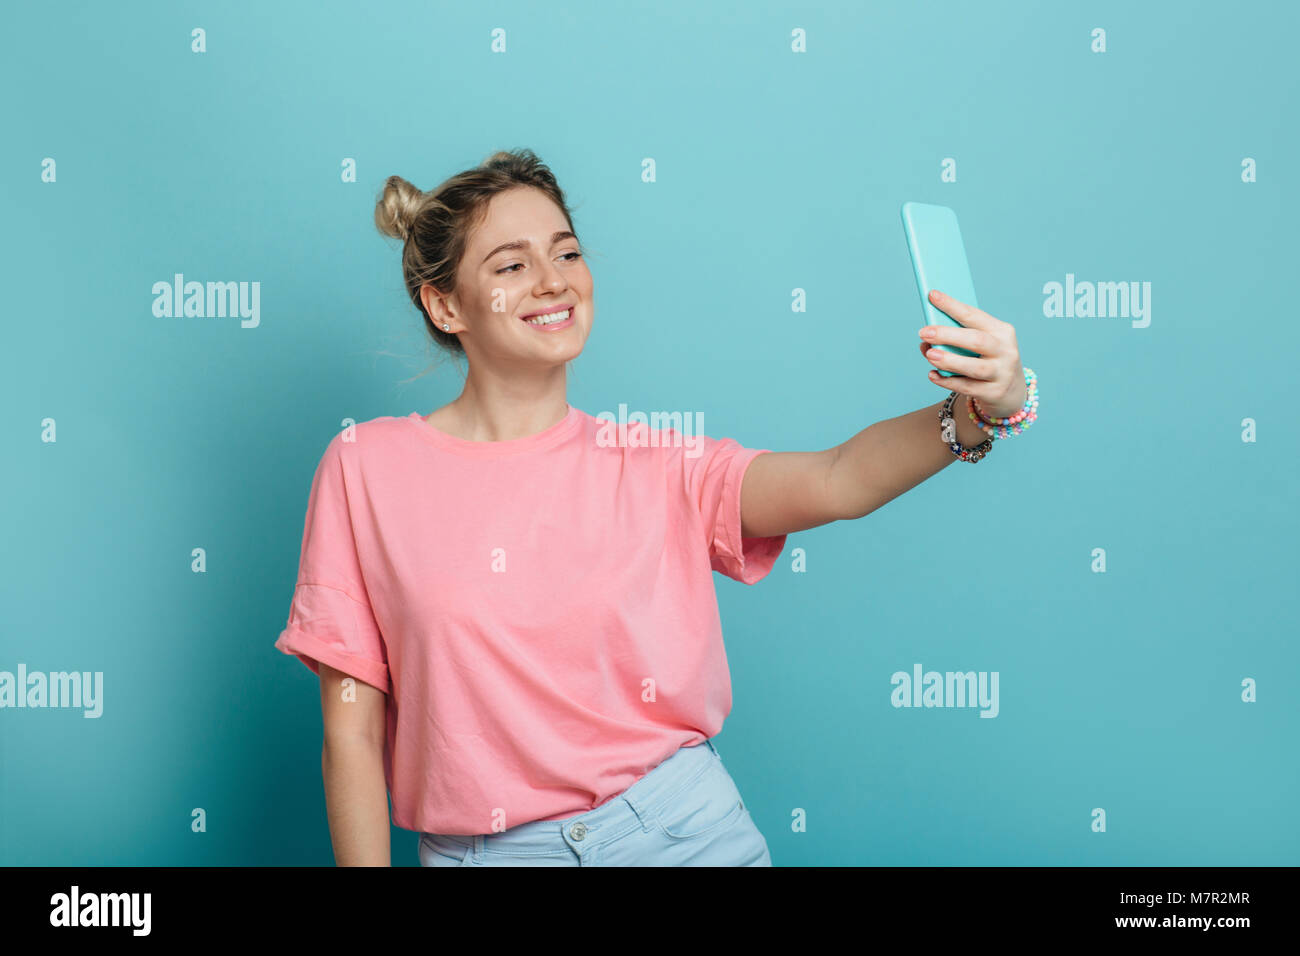 woman making photo on her smartphone blue background Stock Photo